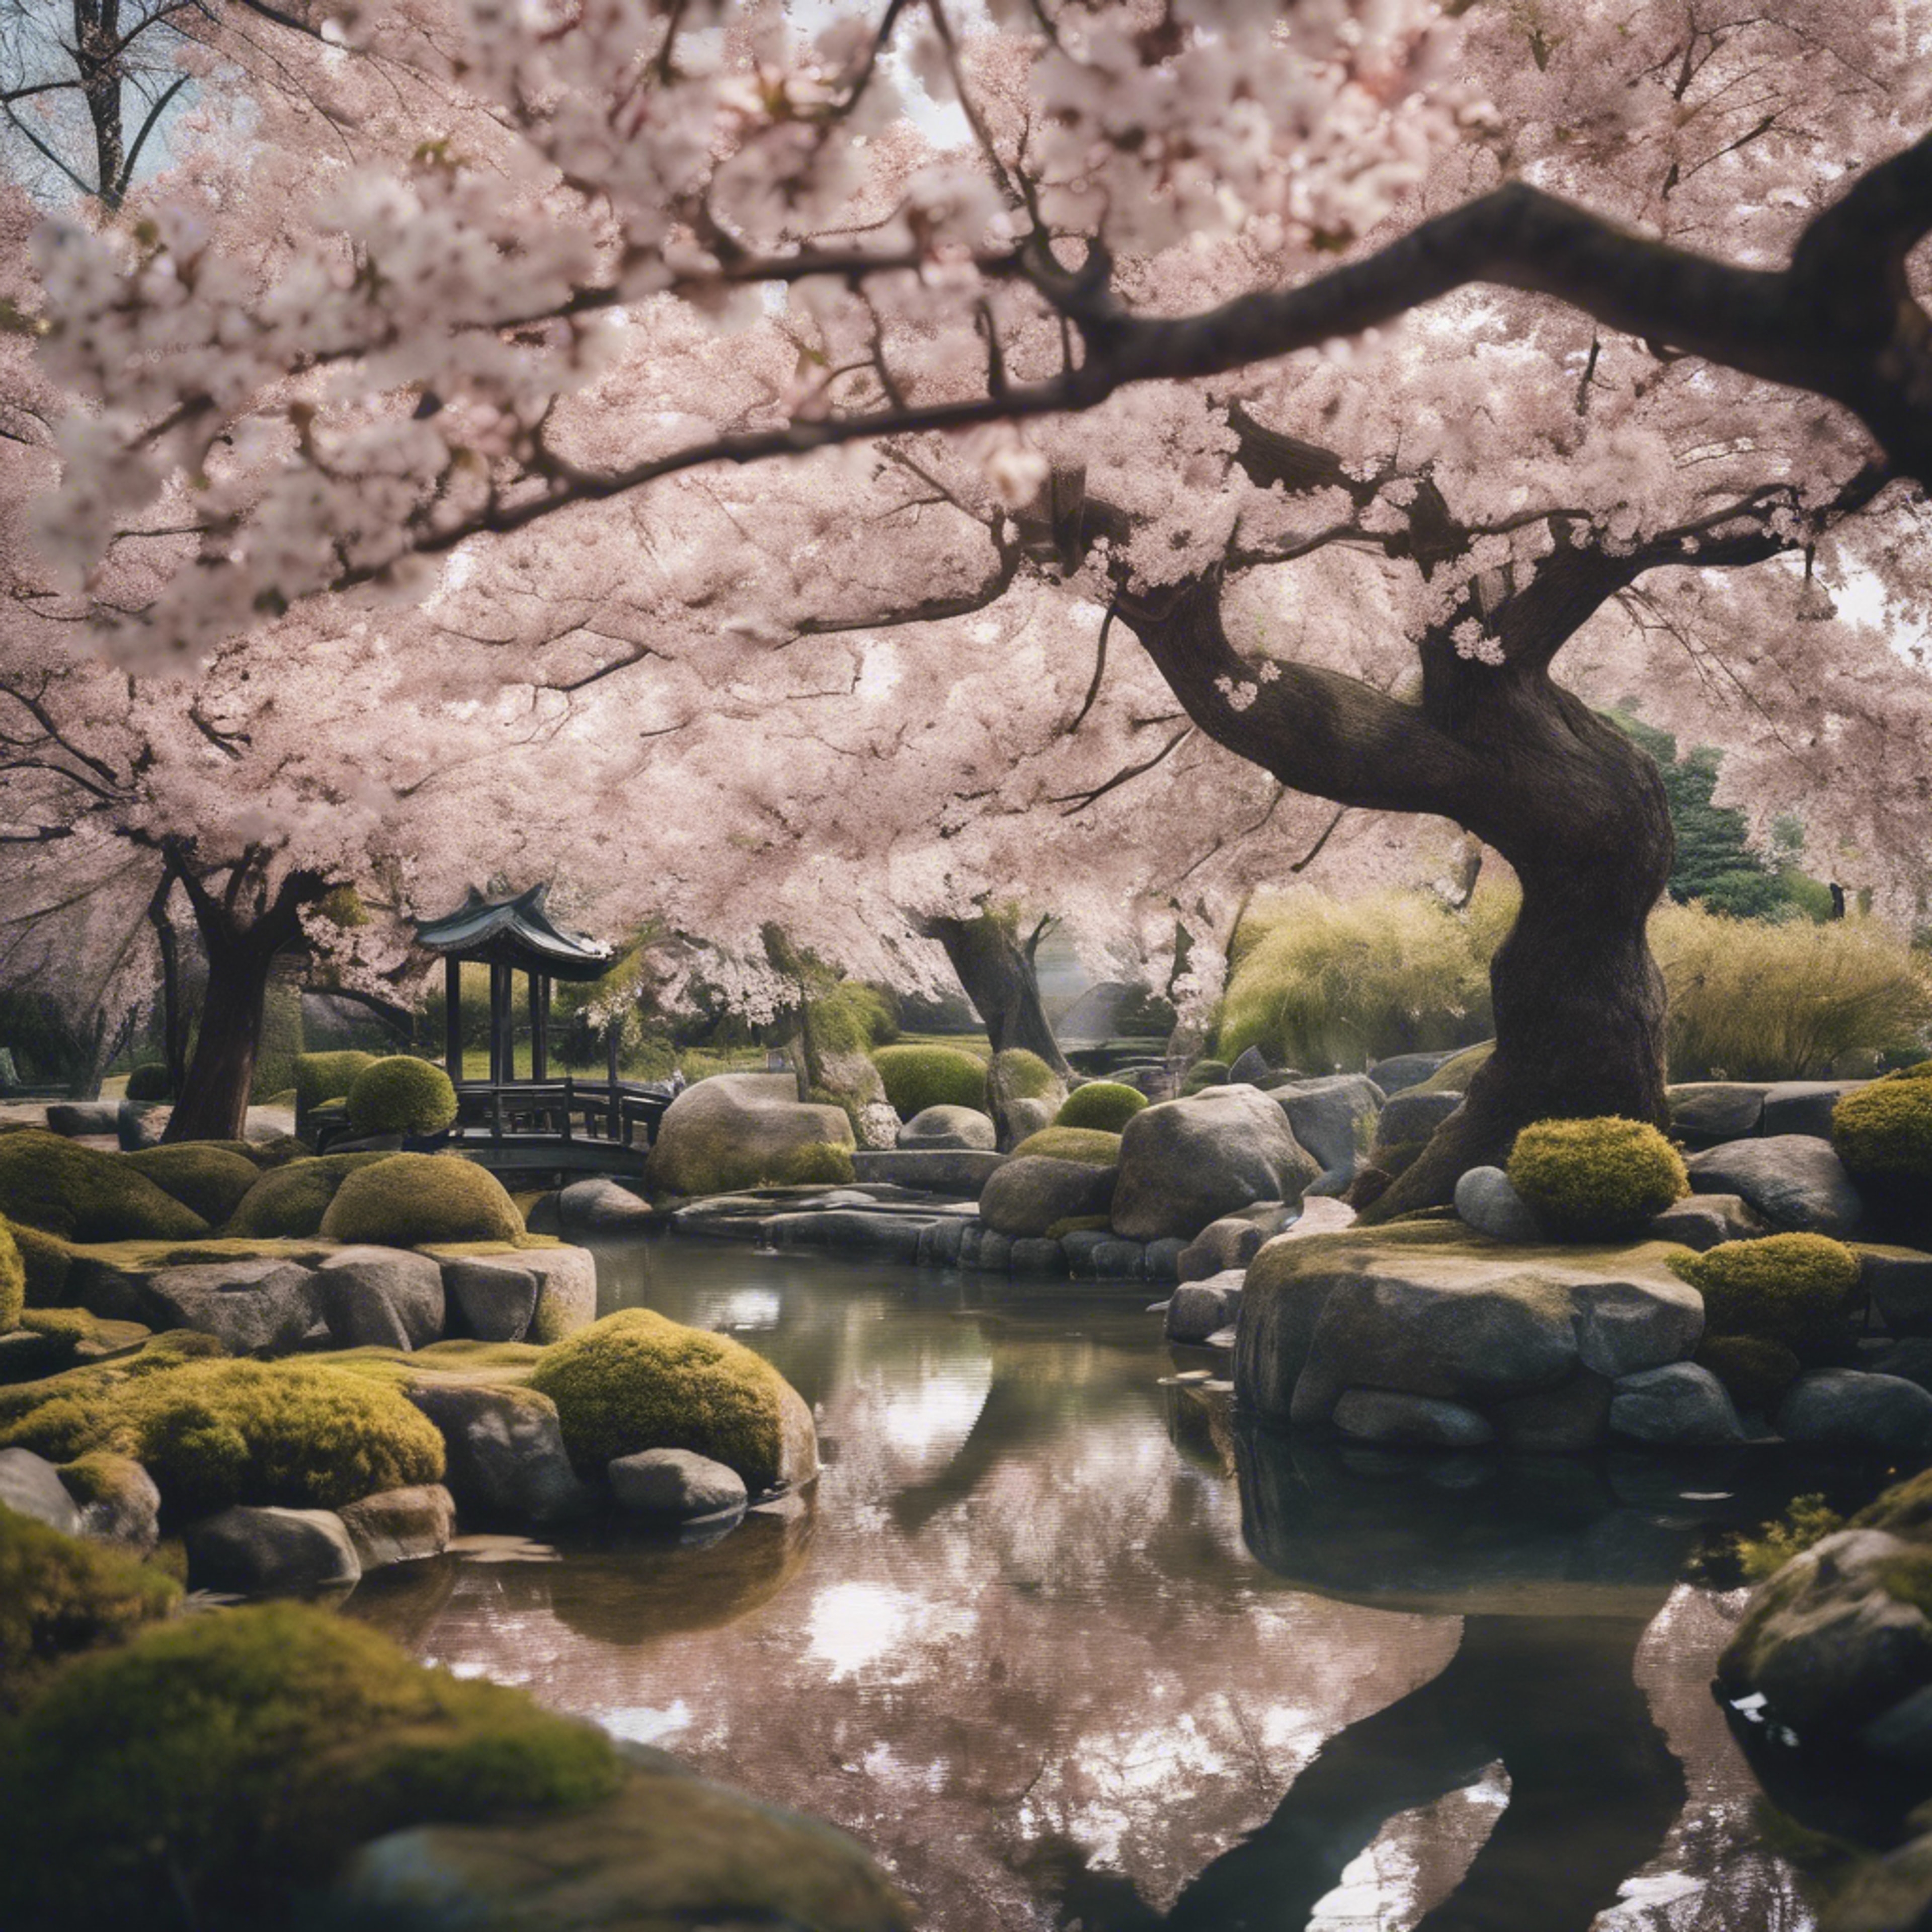 A wide-angle view of a serene Japanese garden with cherry blossoms in full bloom. Tapet[cf6d4e9694a4479cb5ff]